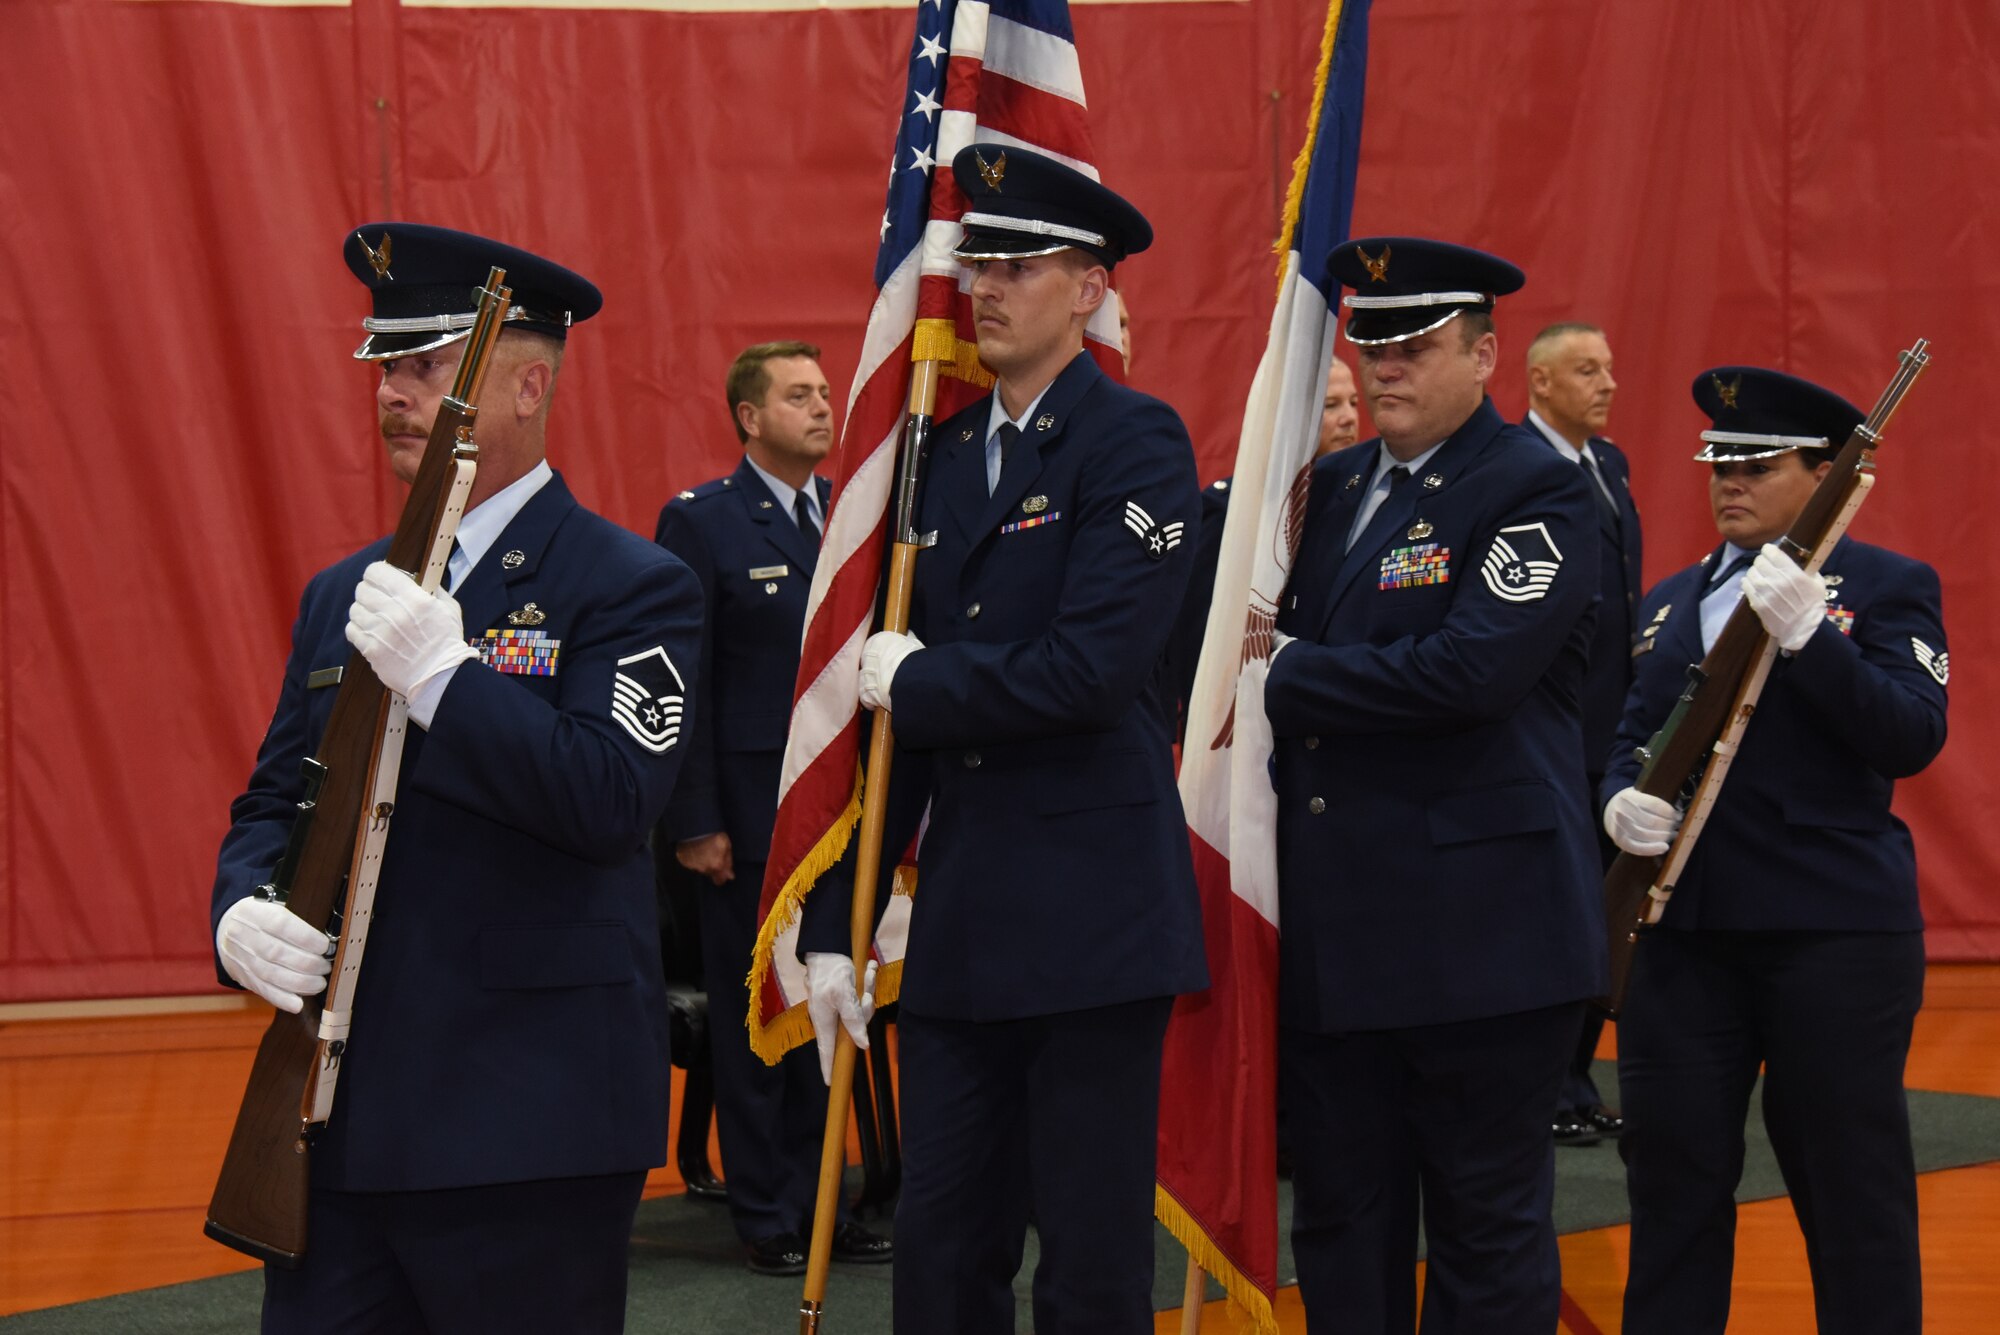 Honor Guard march in ceremony